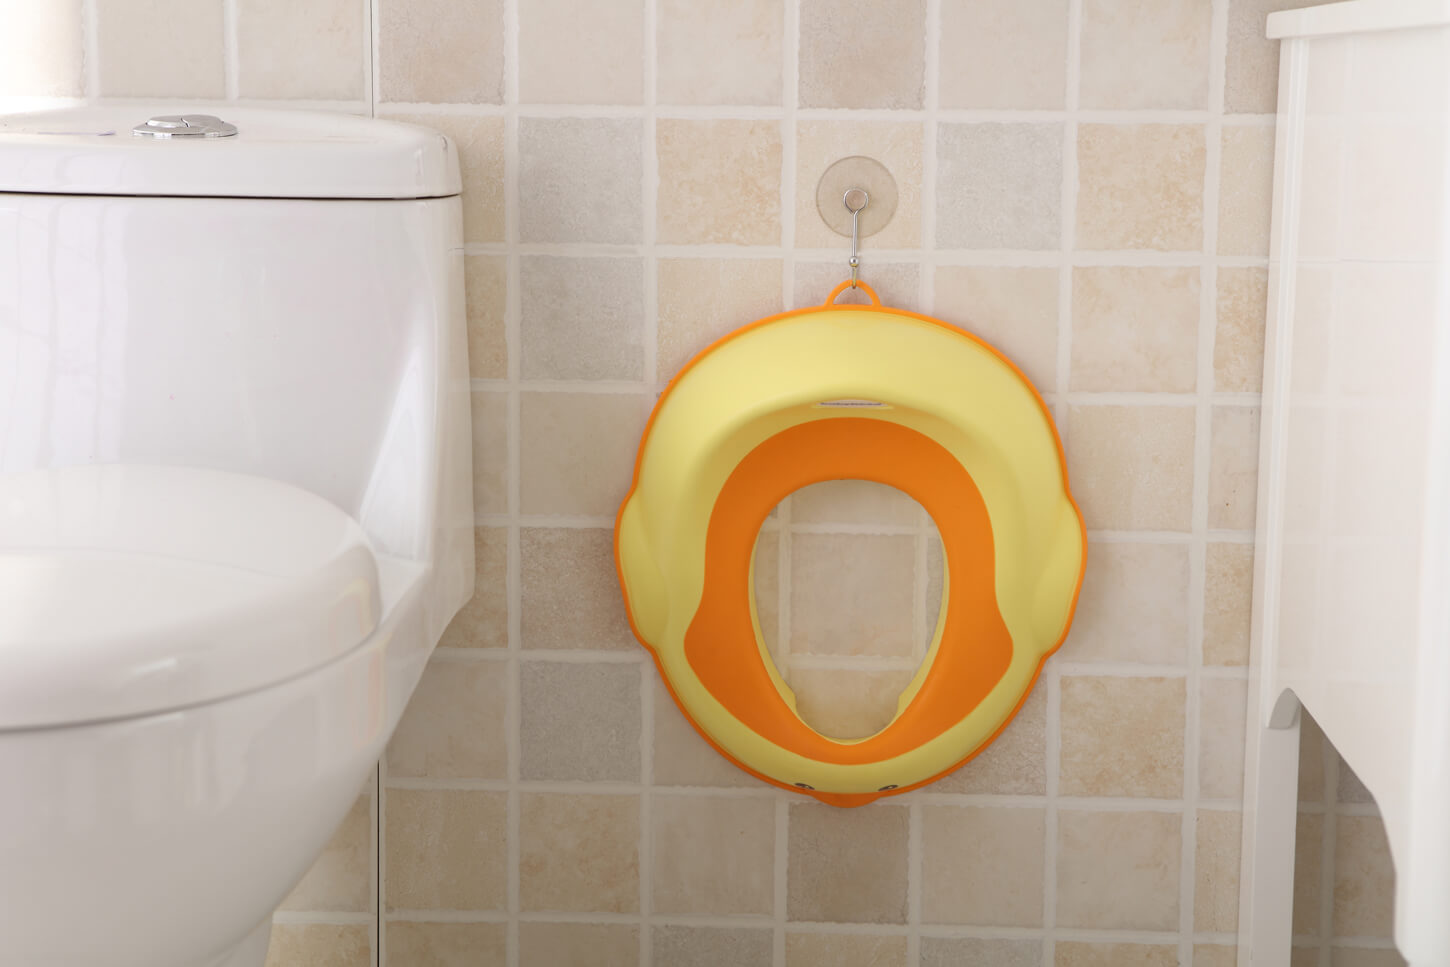 Overview of Babyhood's Duck Potty Seat